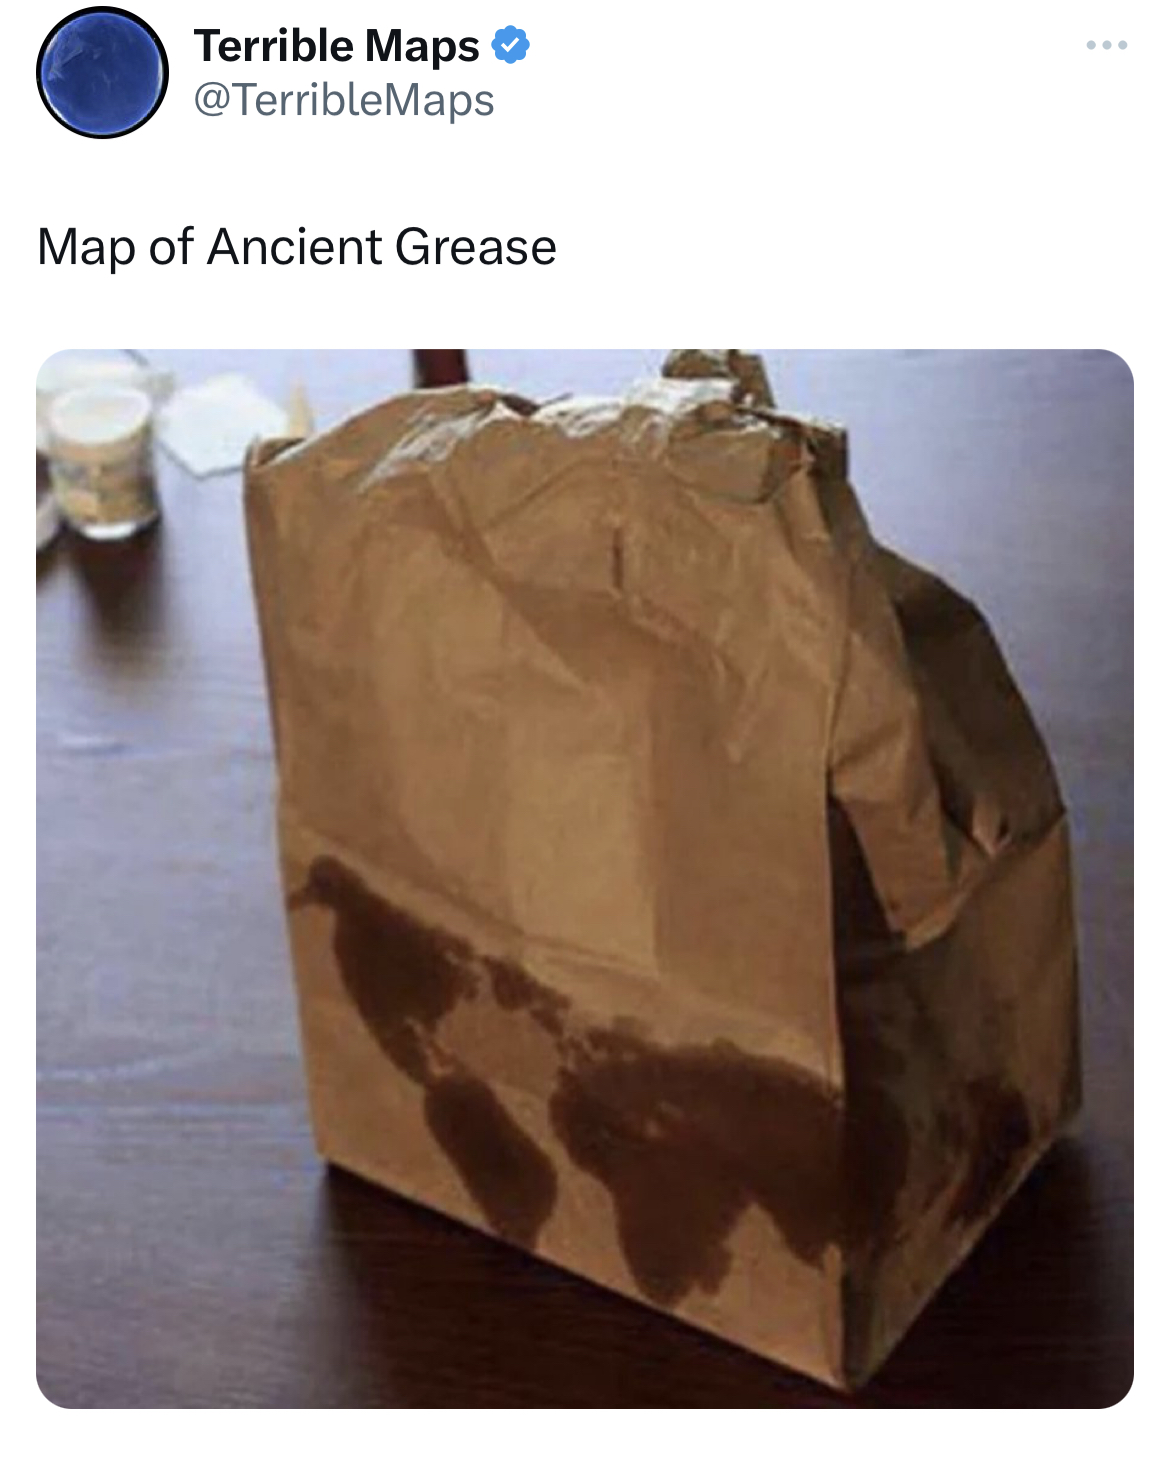 savage and salty tweets - map of the world from ancient grease meme - Terrible Maps Map of Ancient Grease